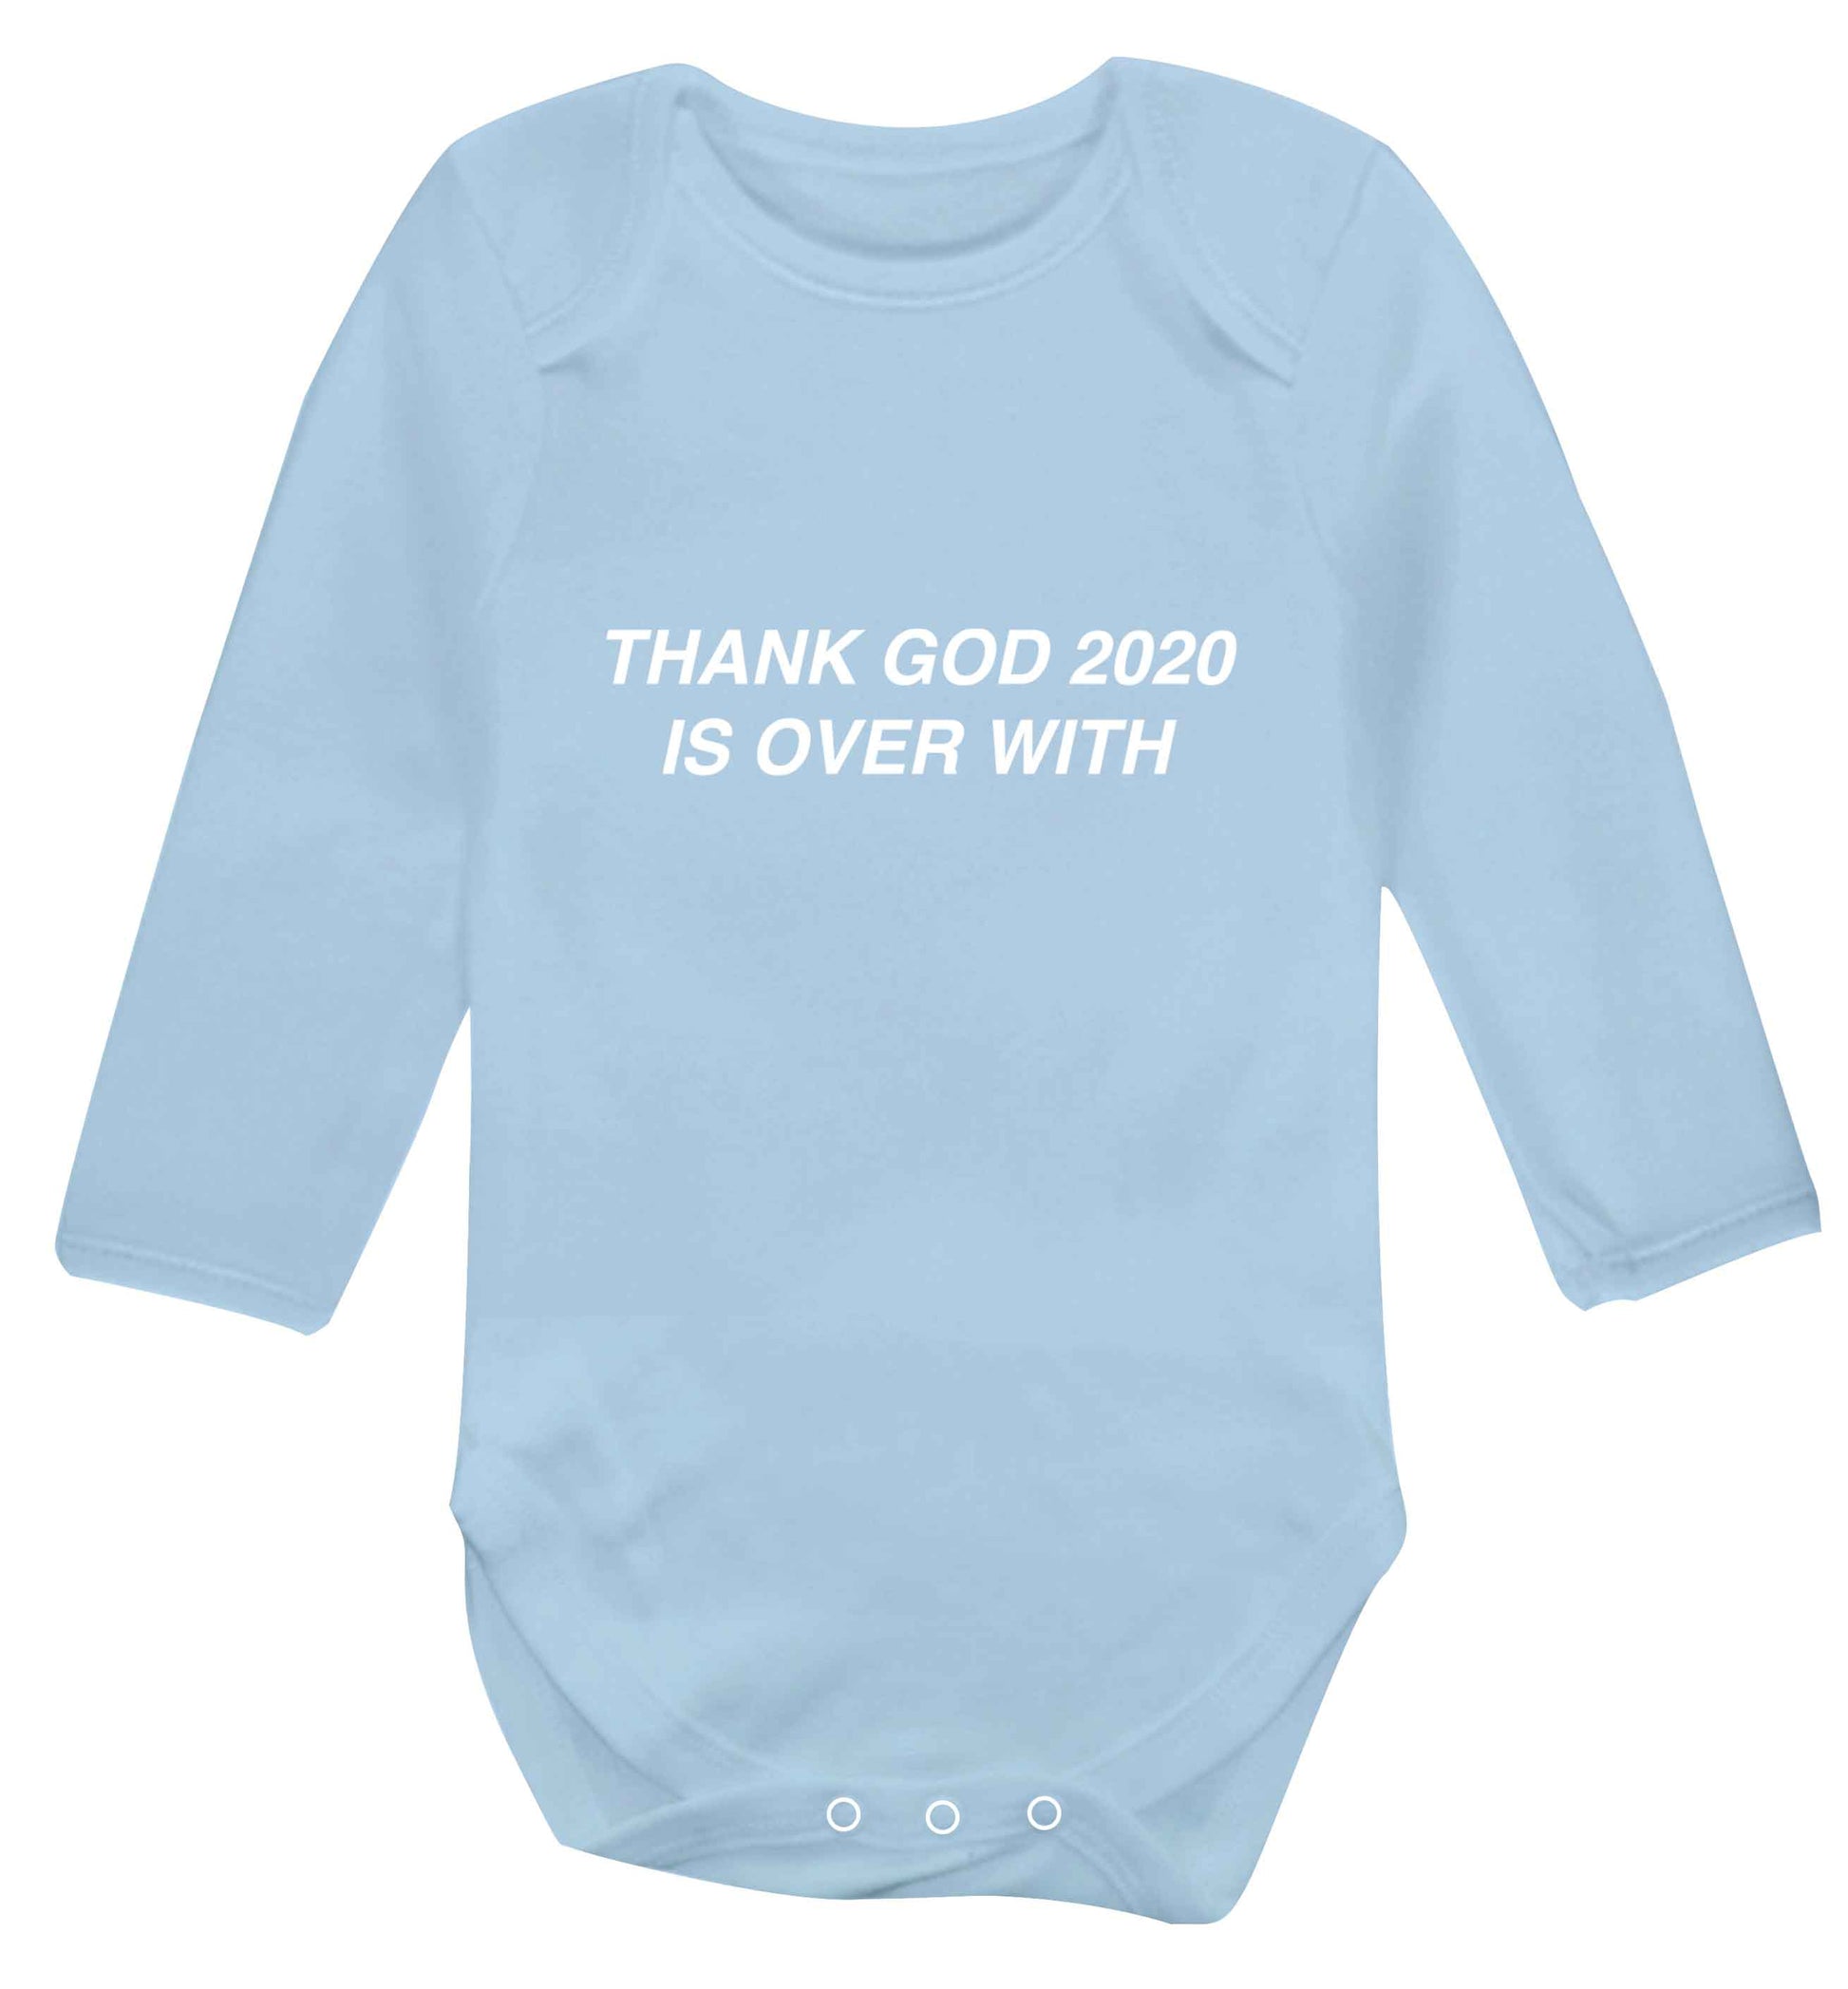 Thank god 2020 is over with baby vest long sleeved pale blue 6-12 months